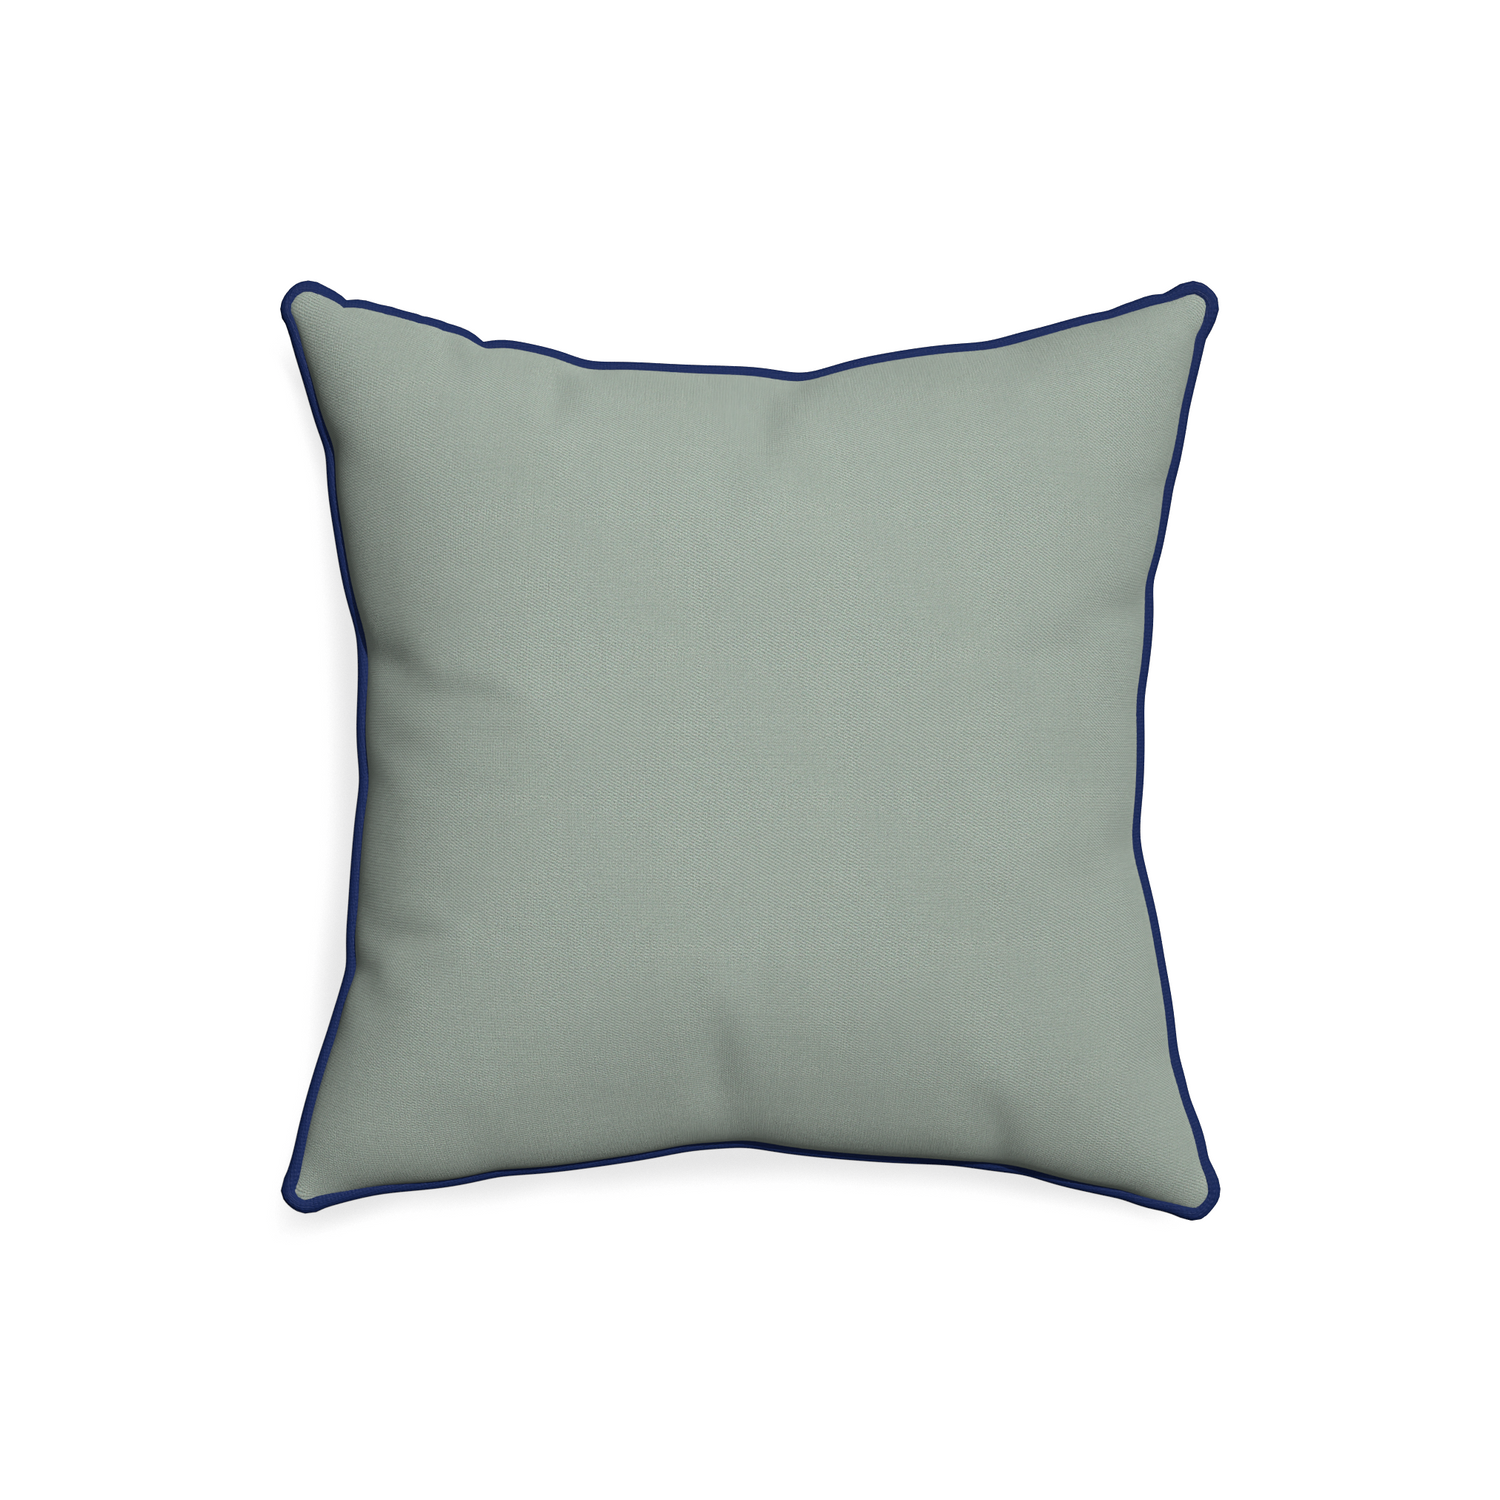 20-square sage custom pillow with midnight piping on white background